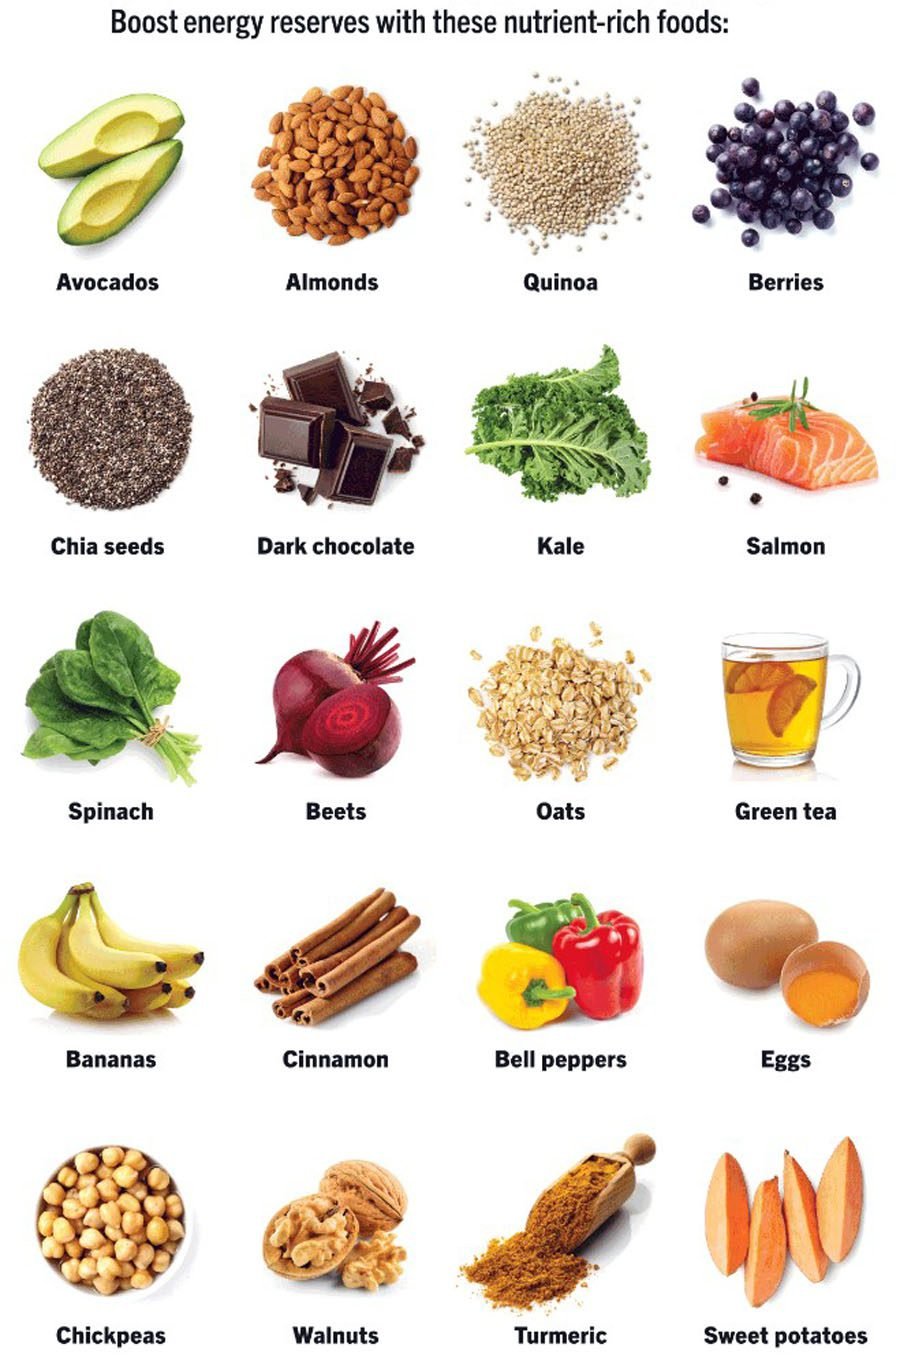 Best Foods for Boosting Energy